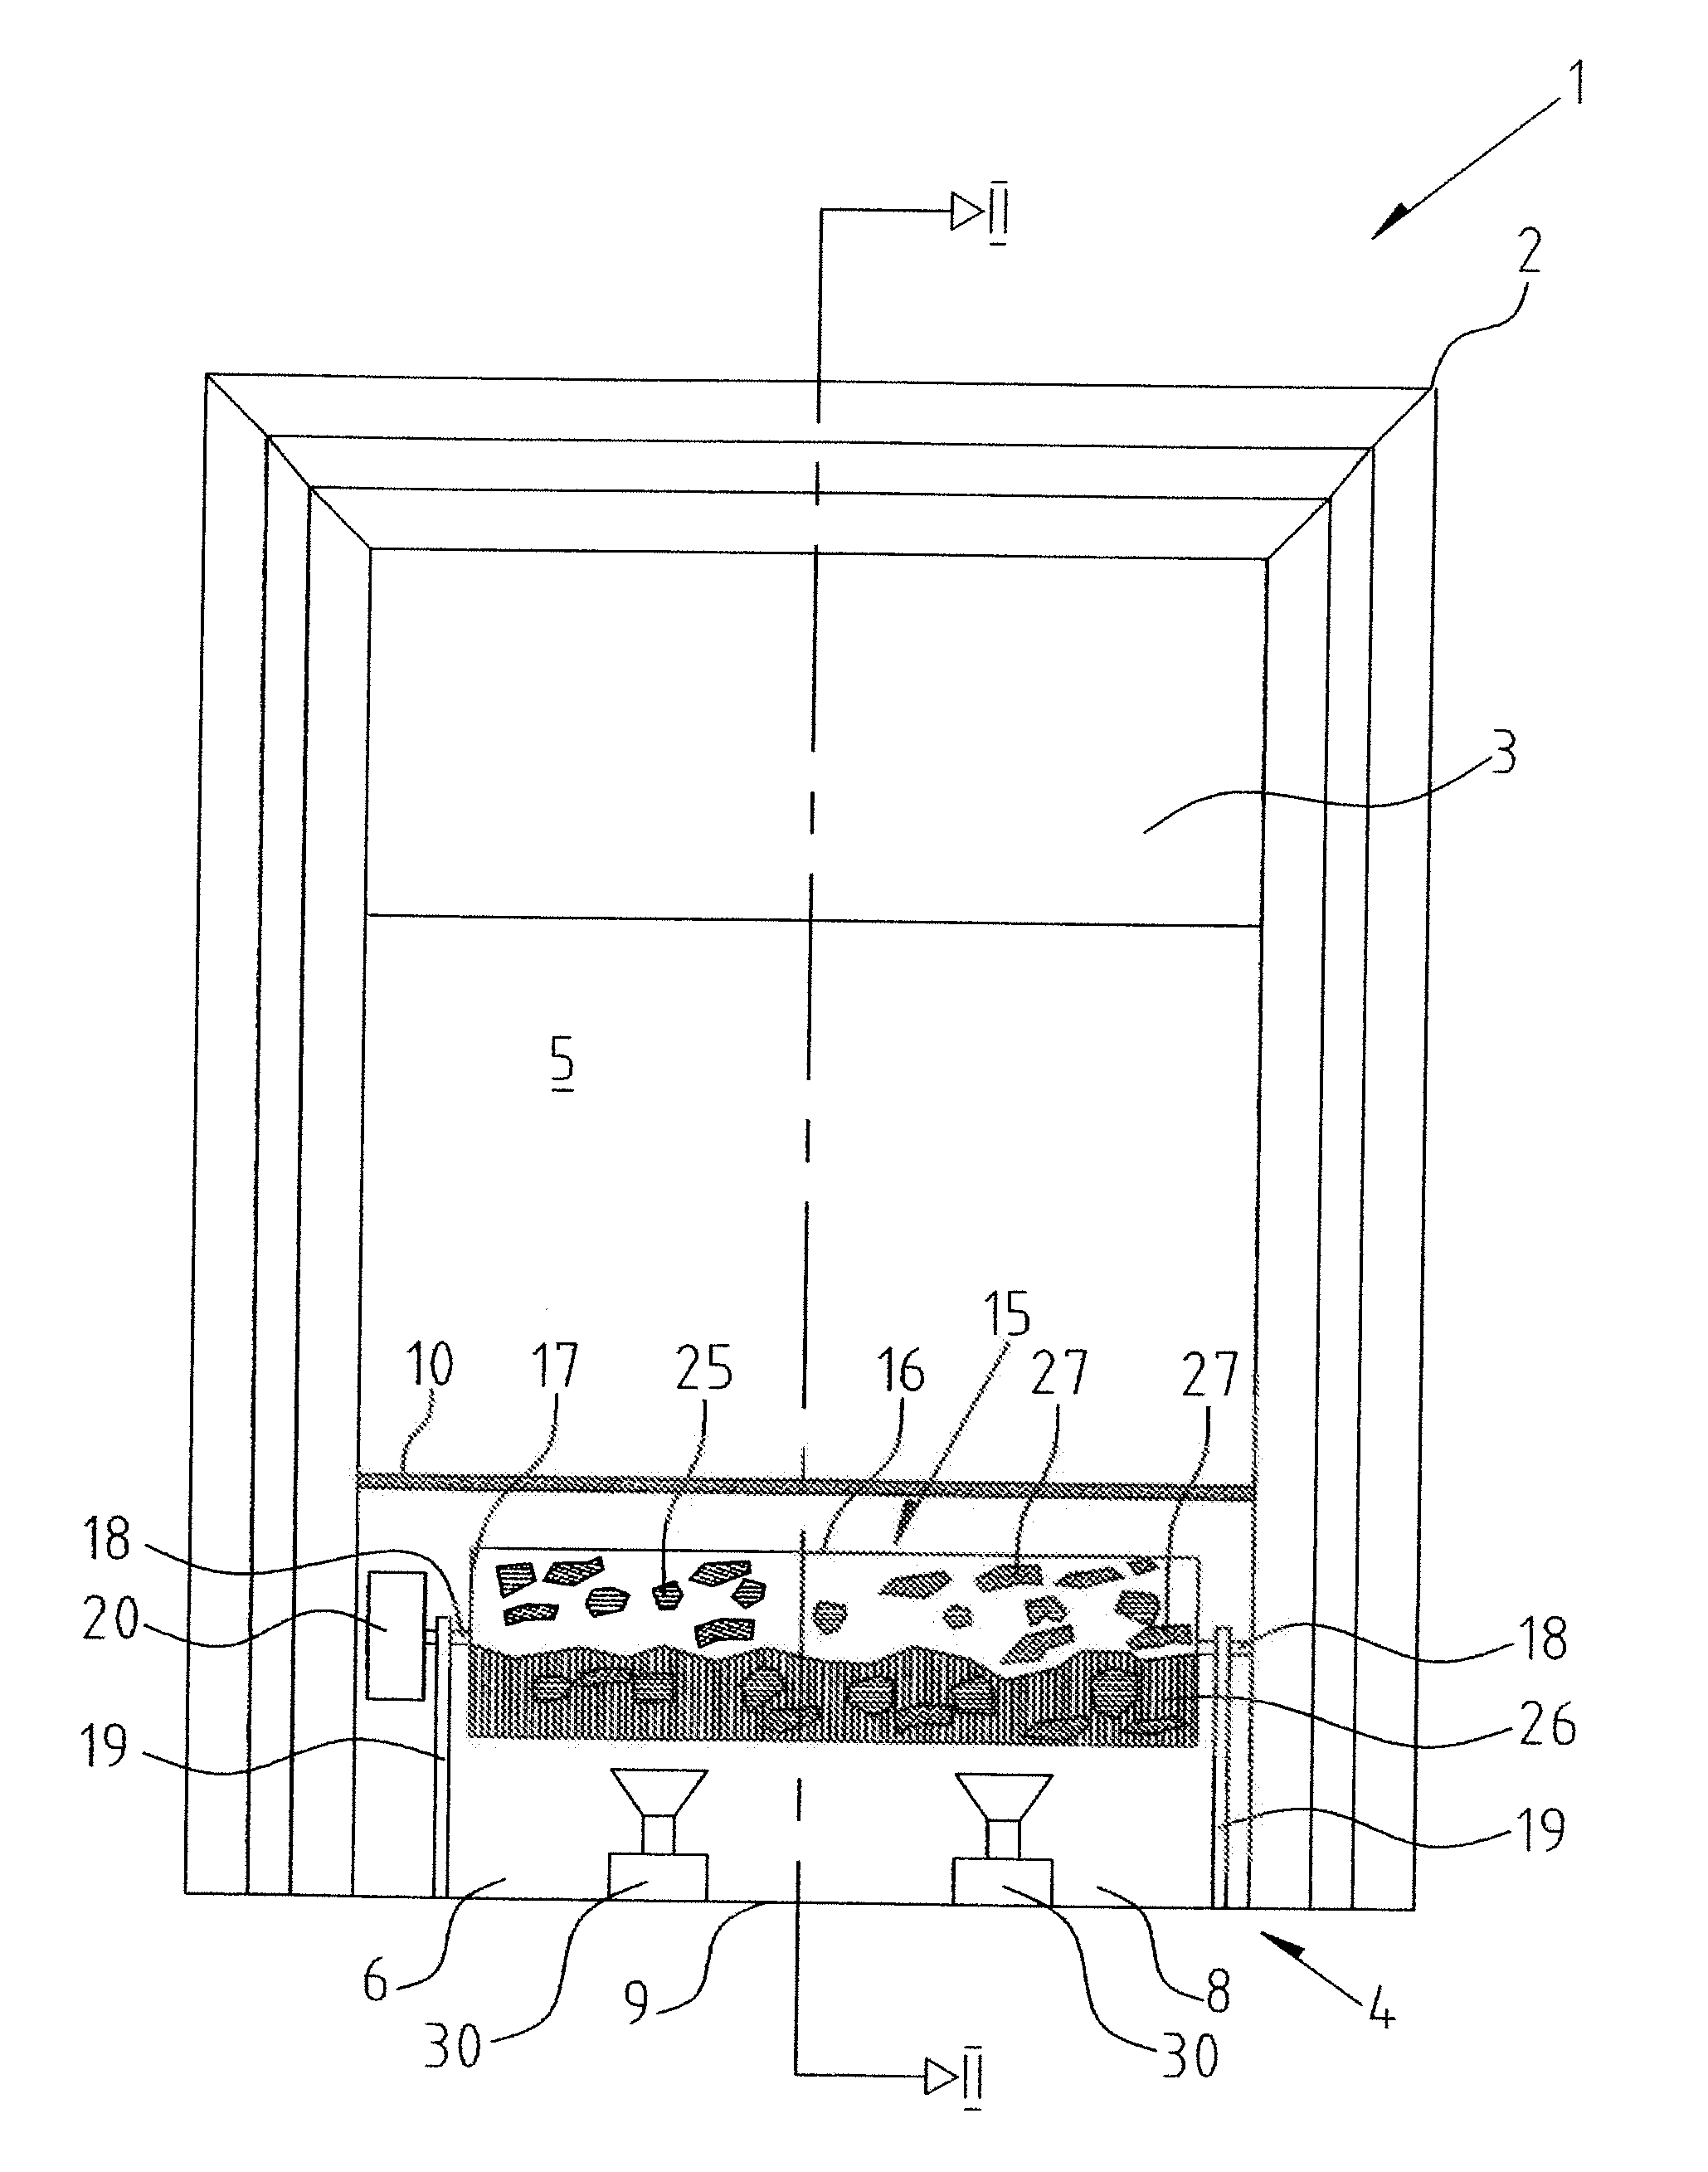 Flame effect apparatus